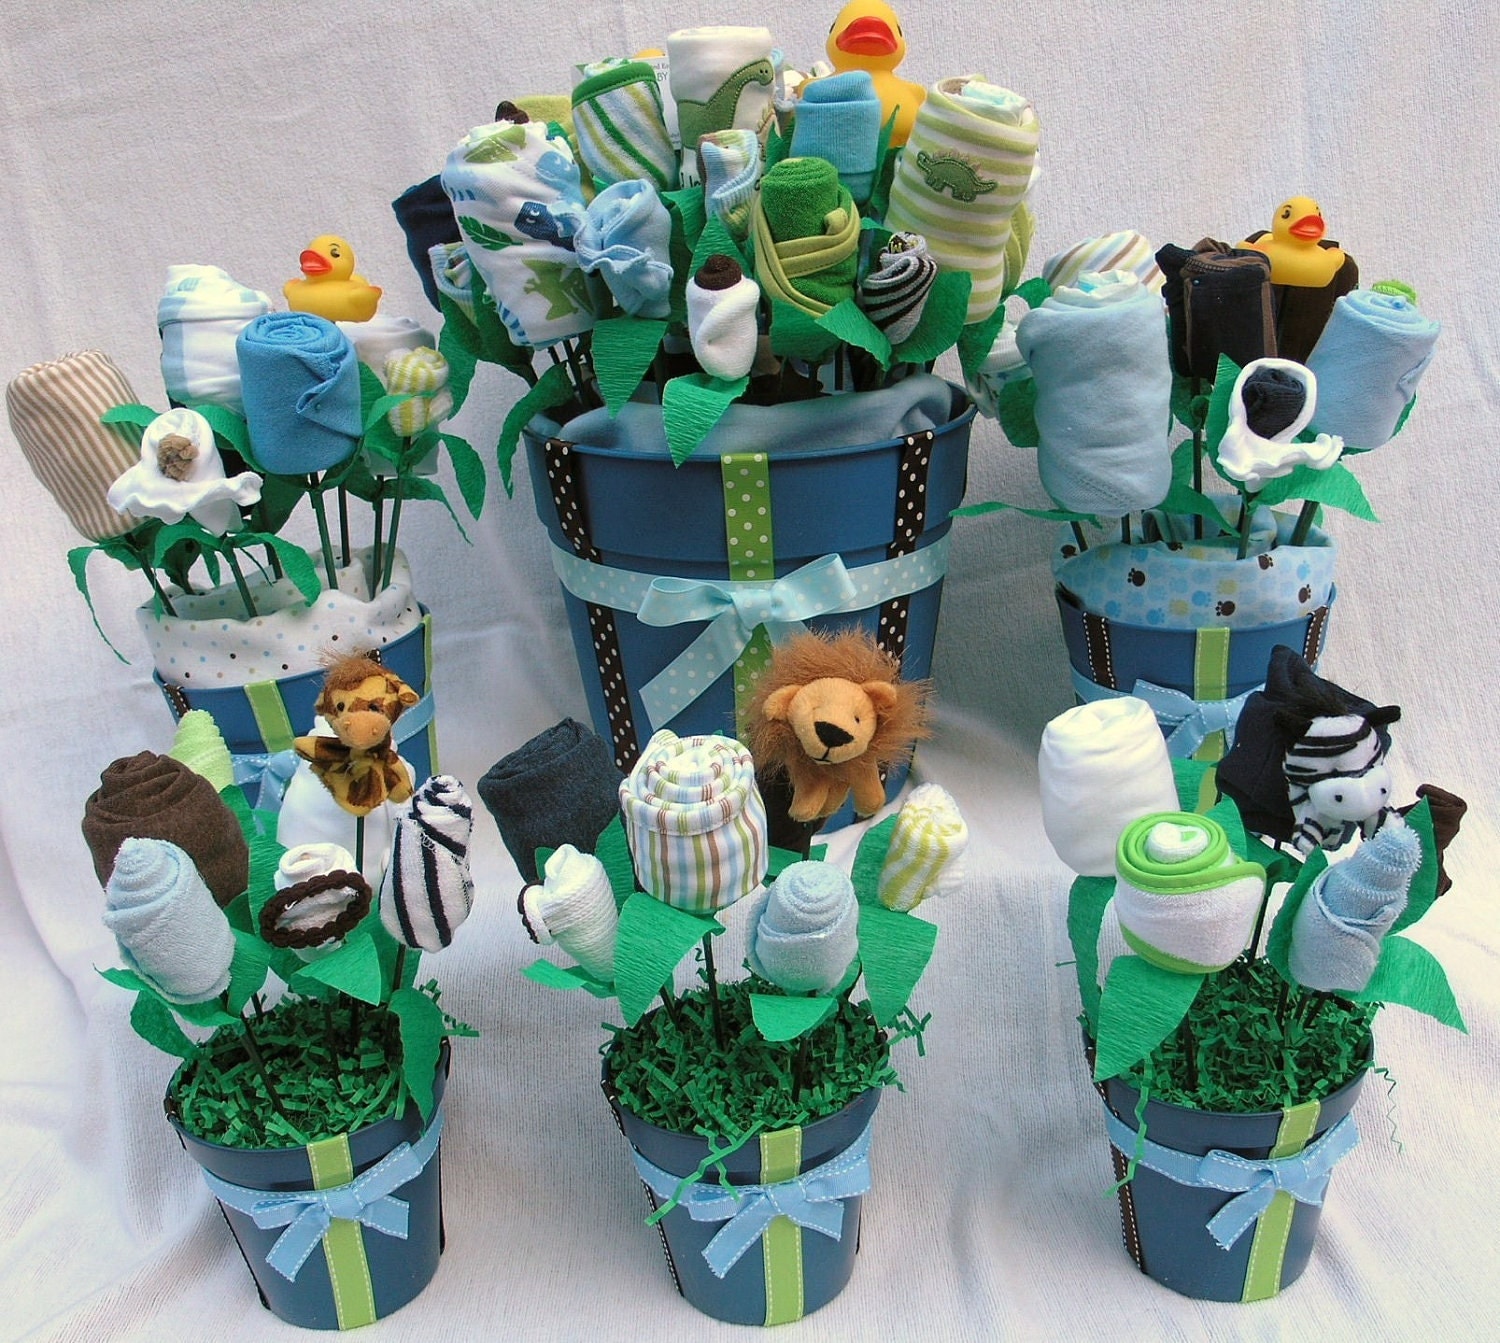 Popular items for baby boy shower centerpieces on Etsy